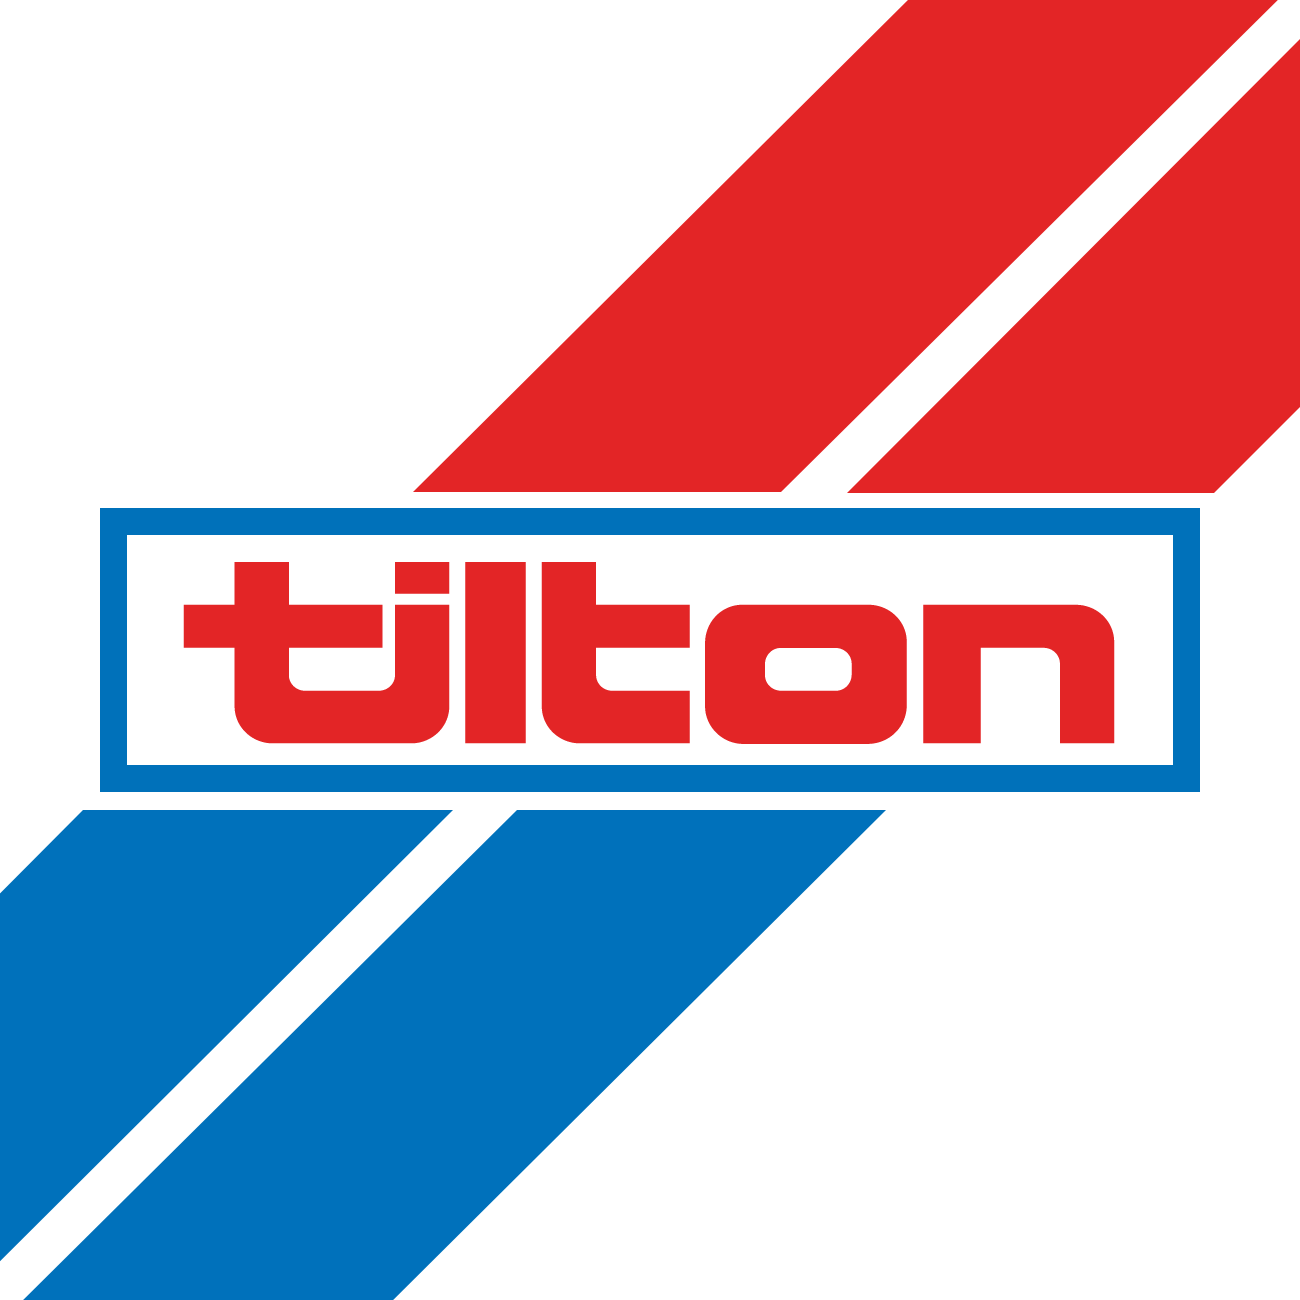 Race Car Parts Logo - Tilton Engineering - Innovative, High-Quality Racing Products